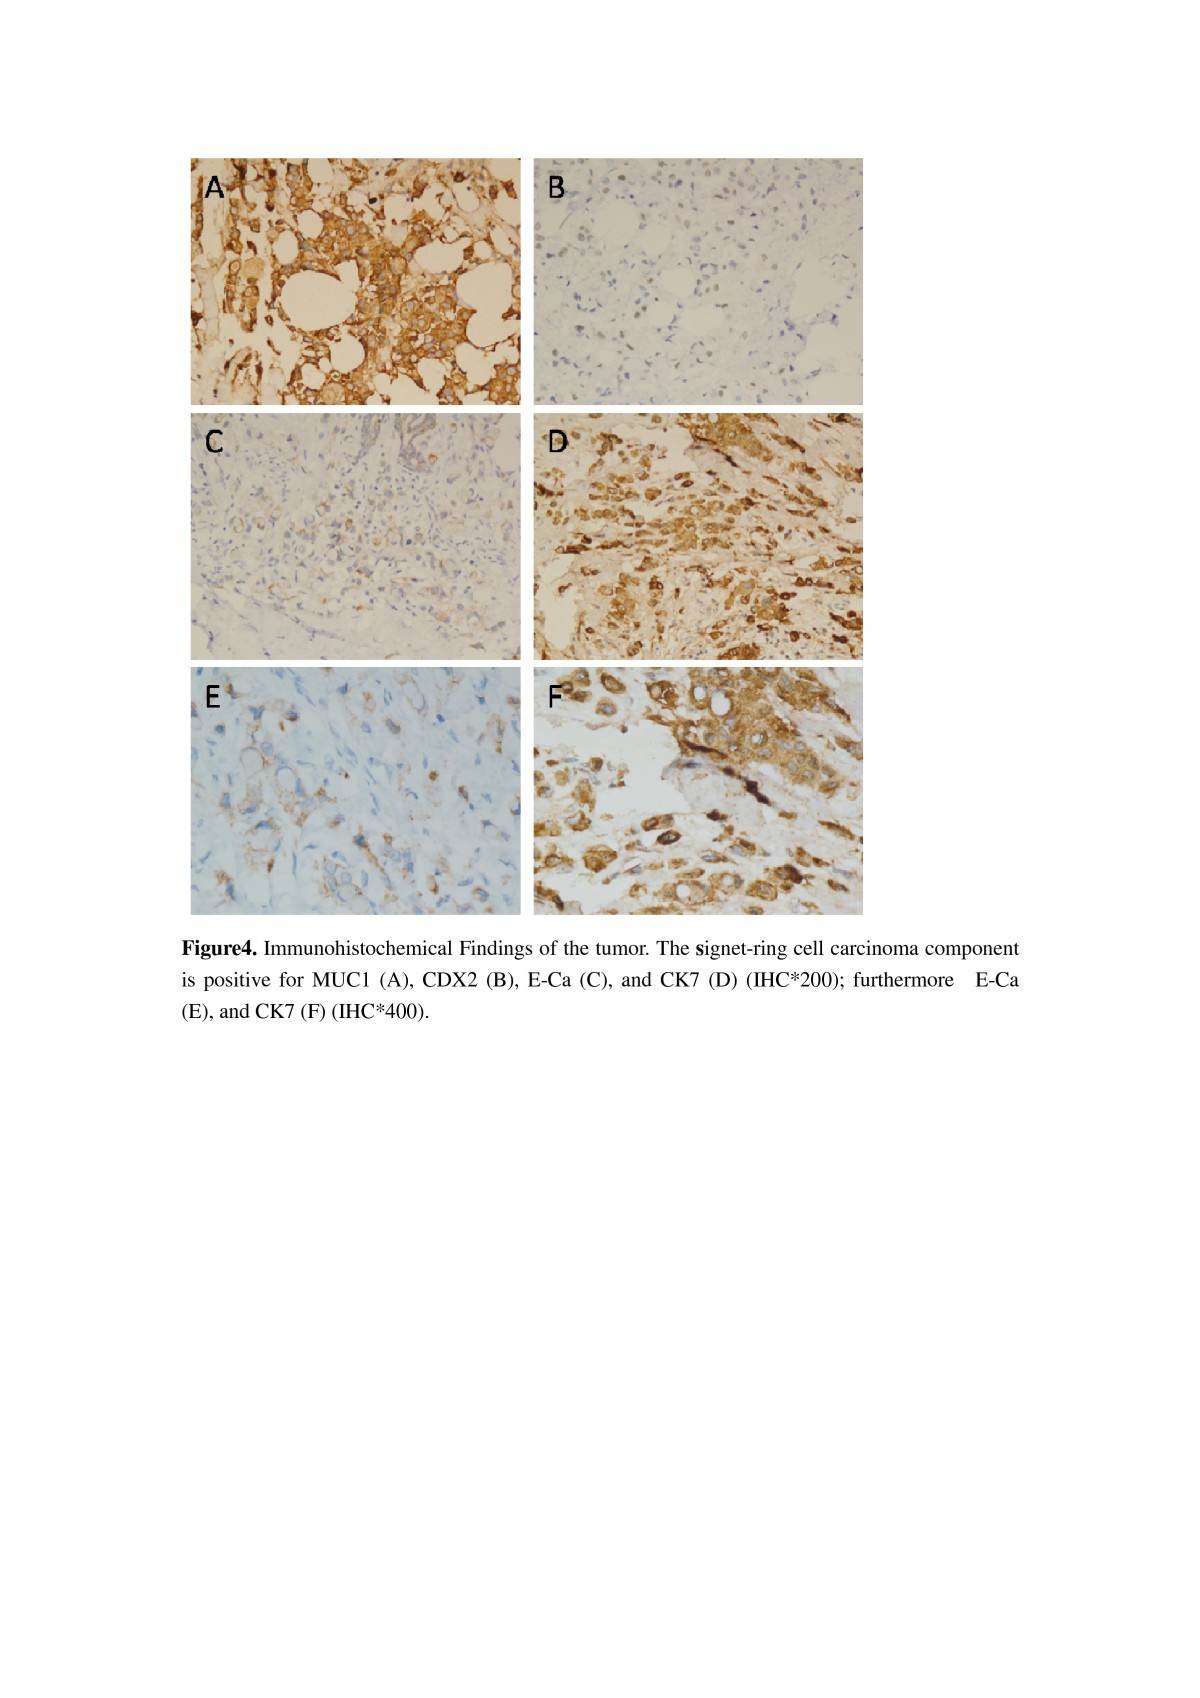 Journal of Oncology Research and Treatment - A Rare Case of Pulmonary  Anaplastic Lymphoma Kinase Positive Signet Ring Cell Carcinoma in A  Japanese Male